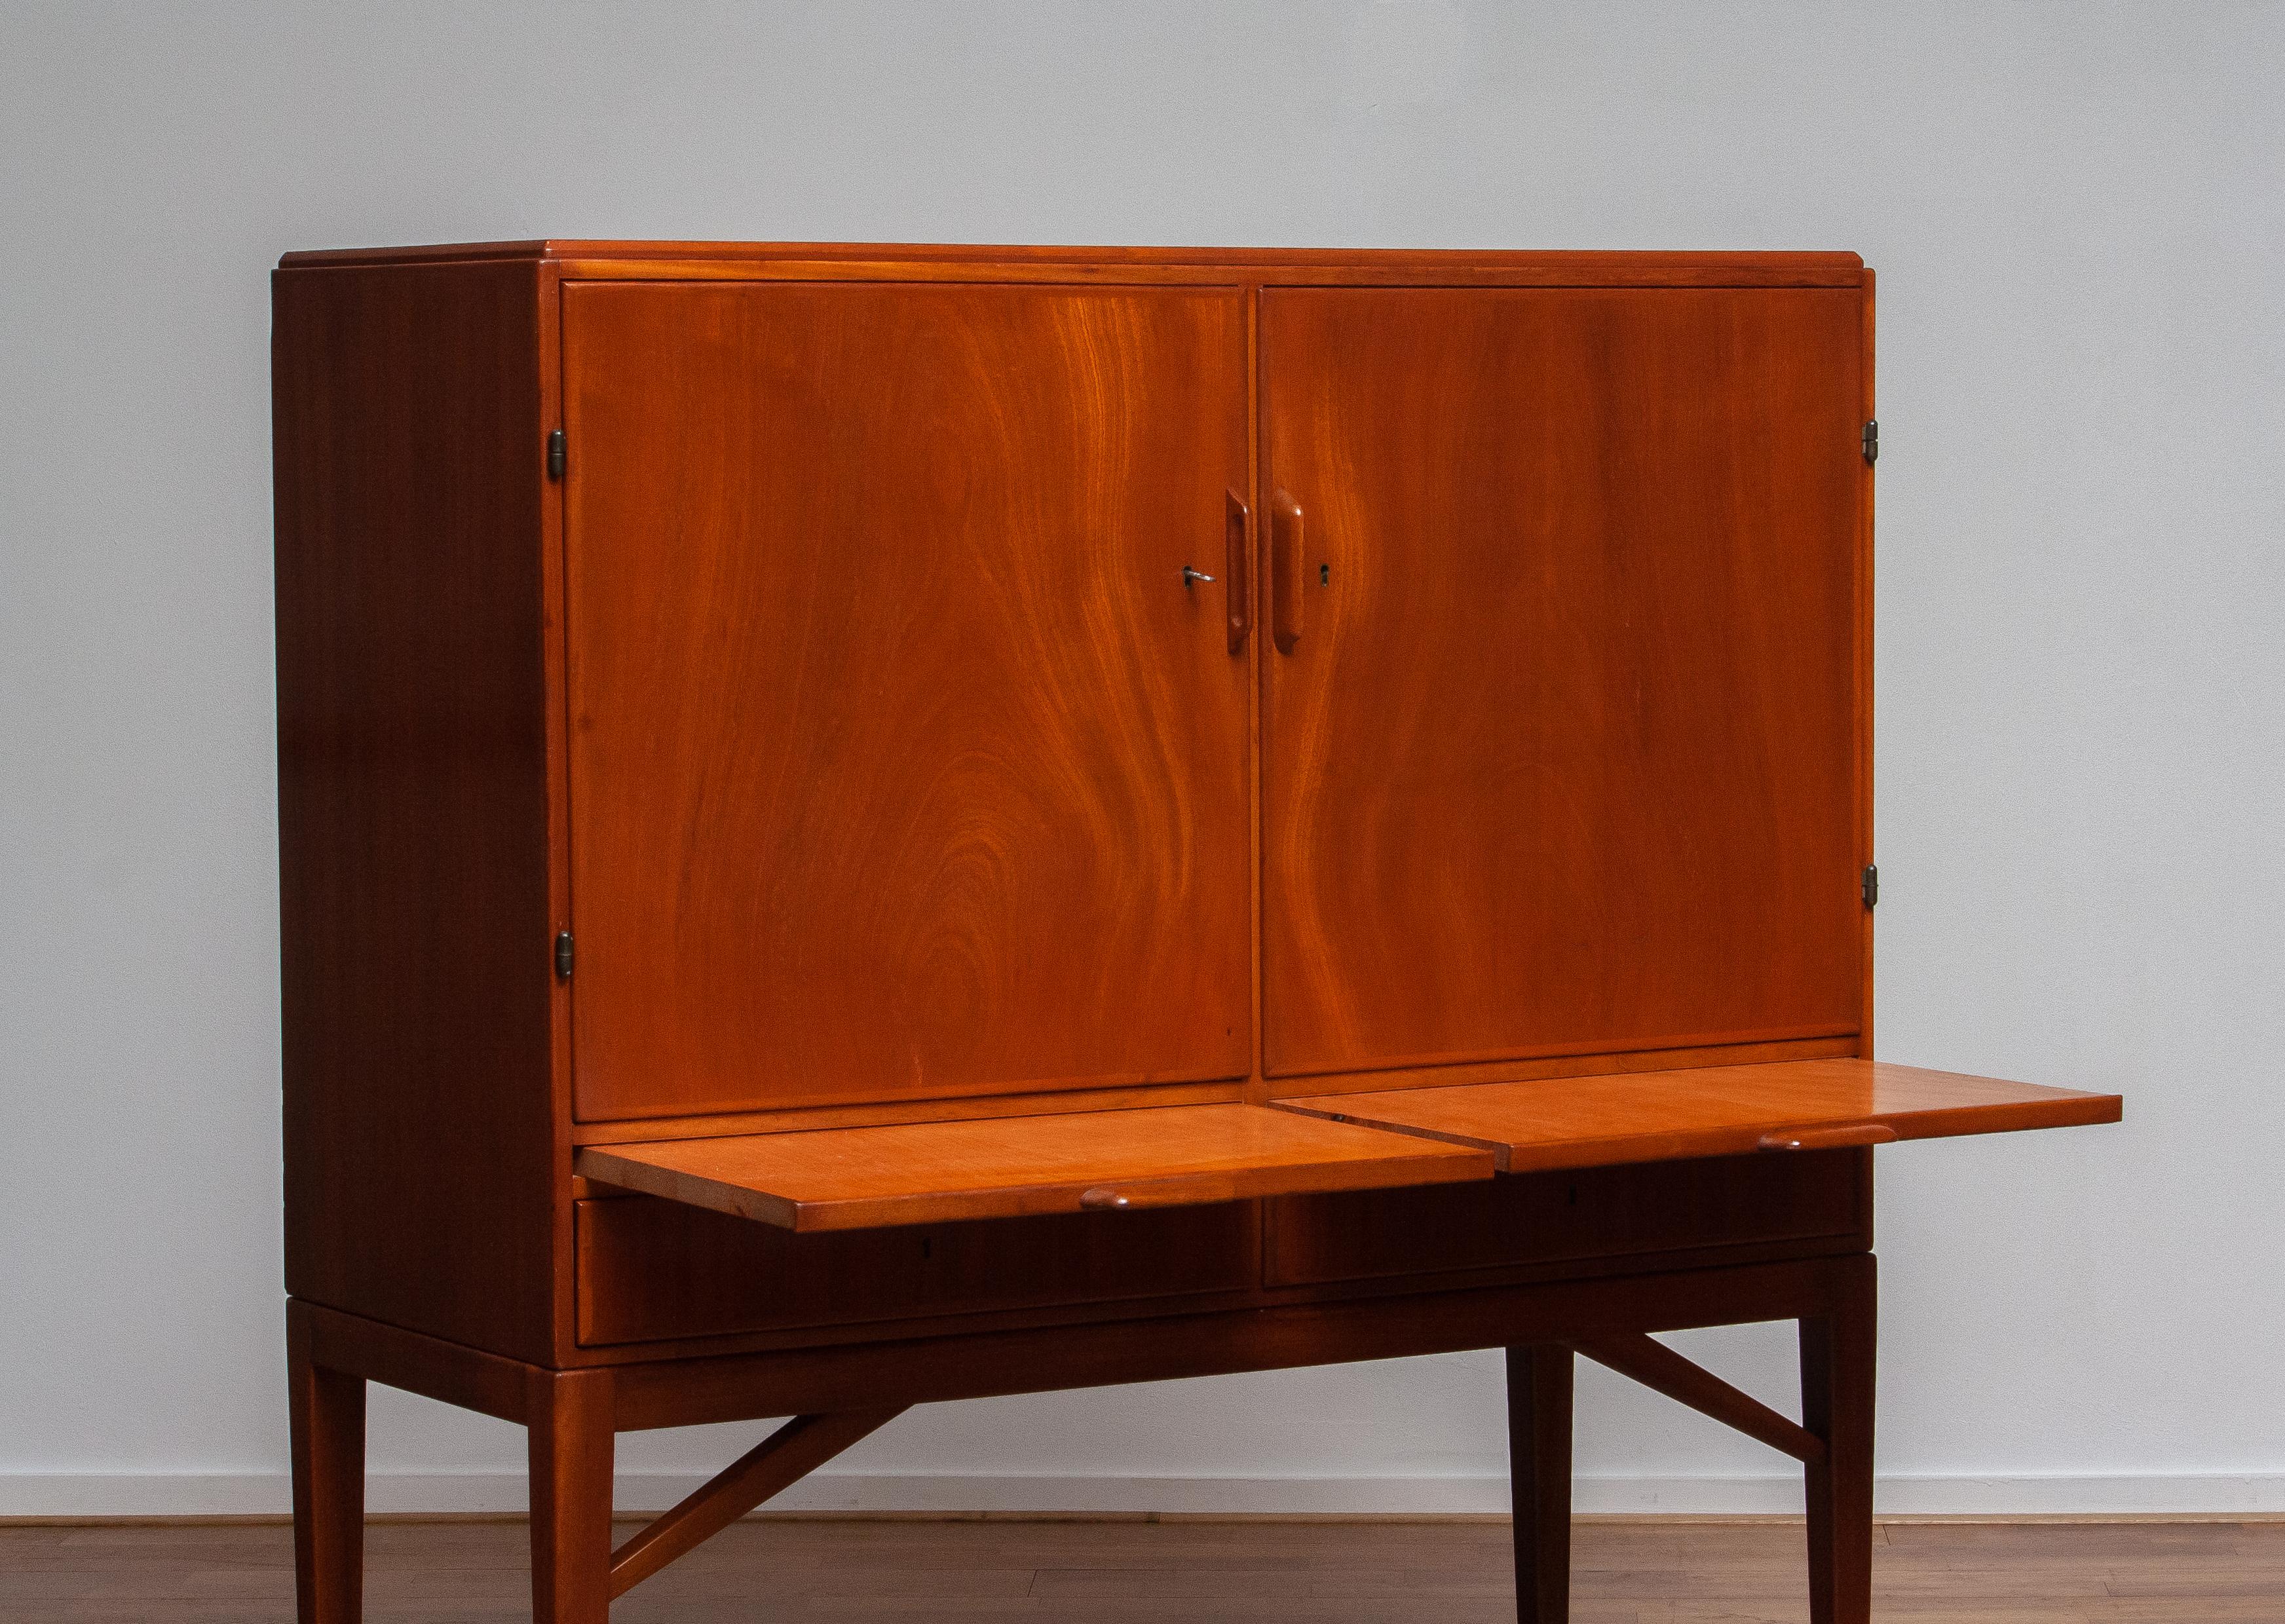 1950s, High Quality Mahogany Dry Bar / Cabinet Made by Marbo Sweden, SMI Labeled 6